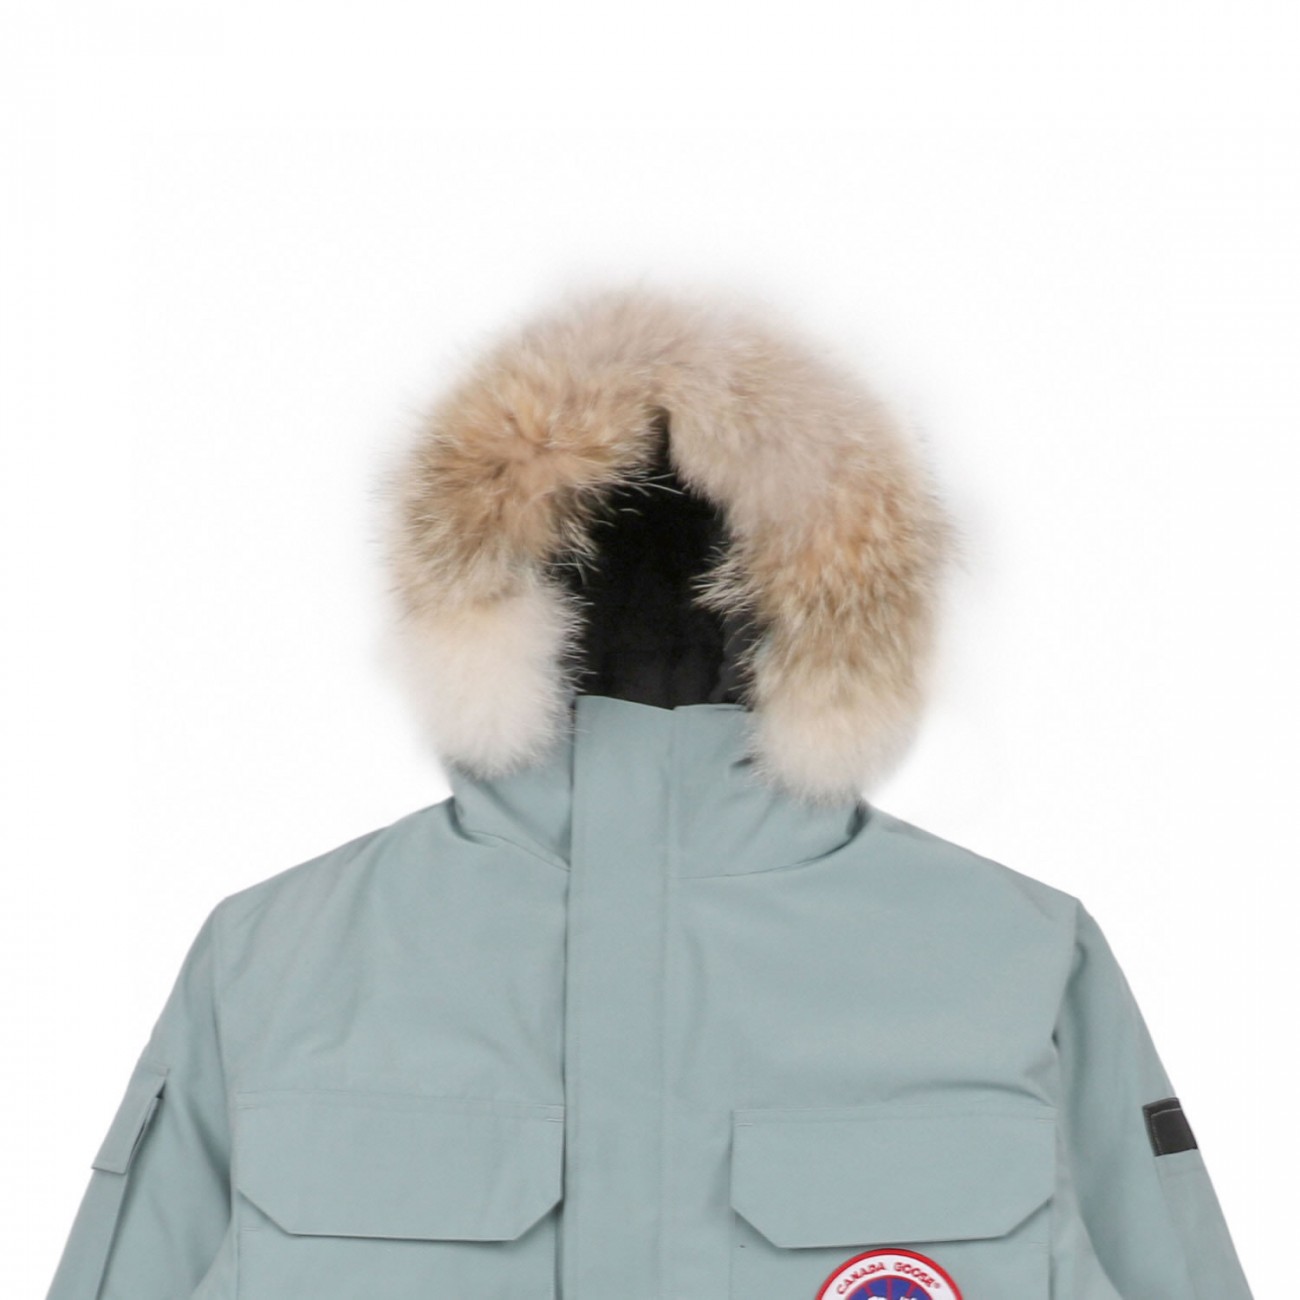 08 ' Canada Goose '19FW Expedition 4660MA Down Jacket Coat "Cyan"